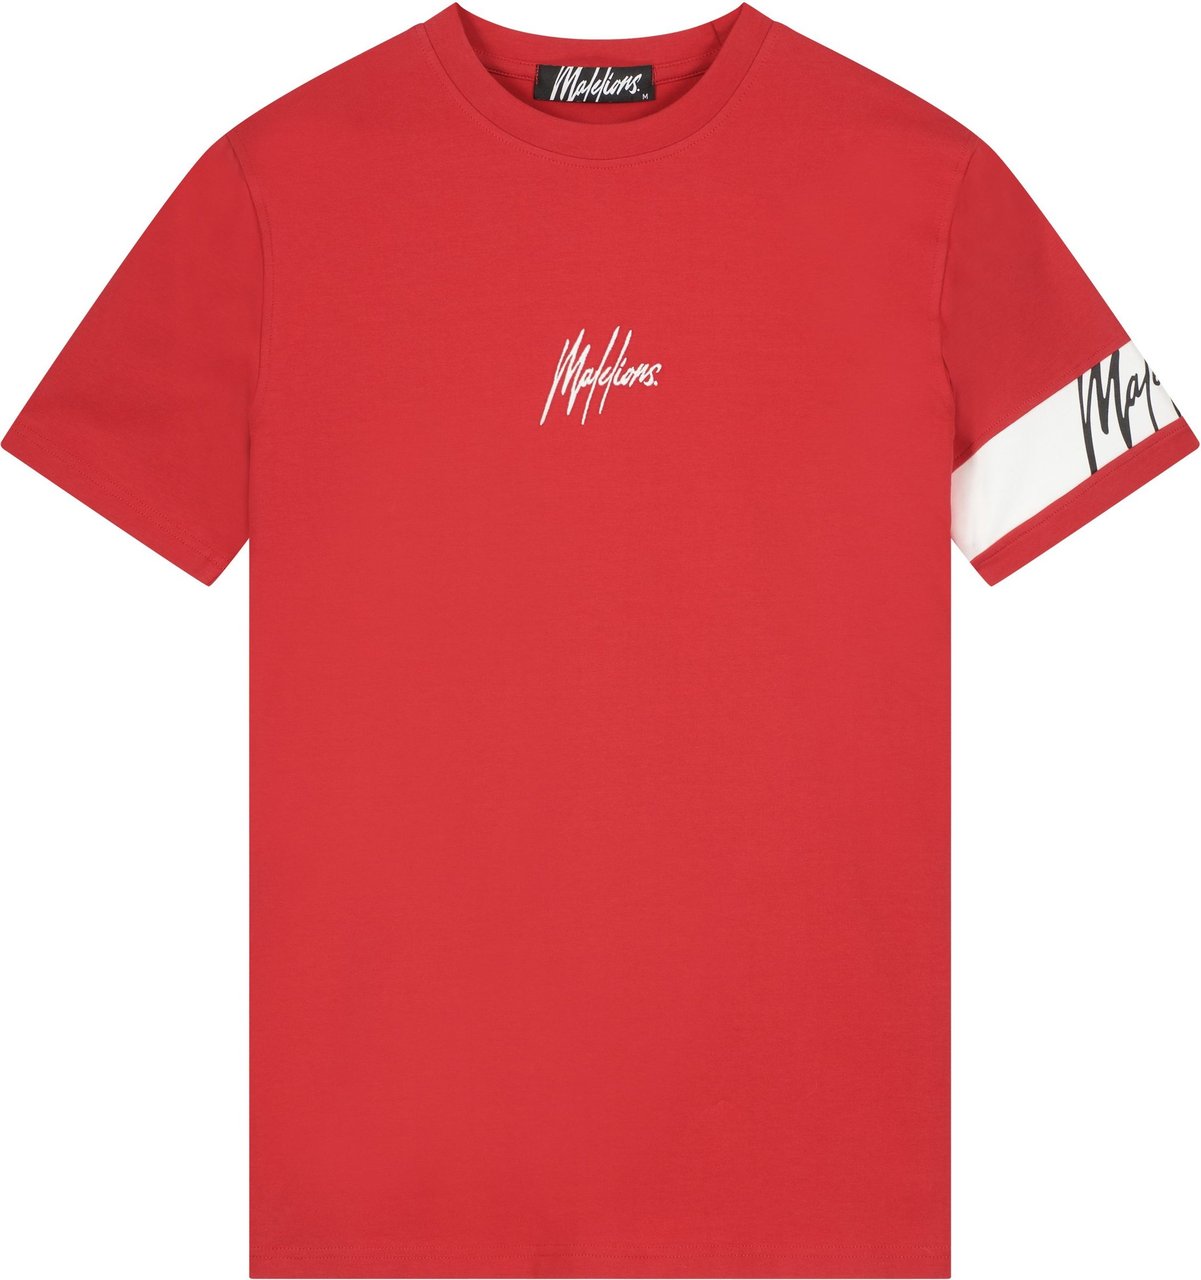 Malelions Captain T-Shirt - Red/White Red